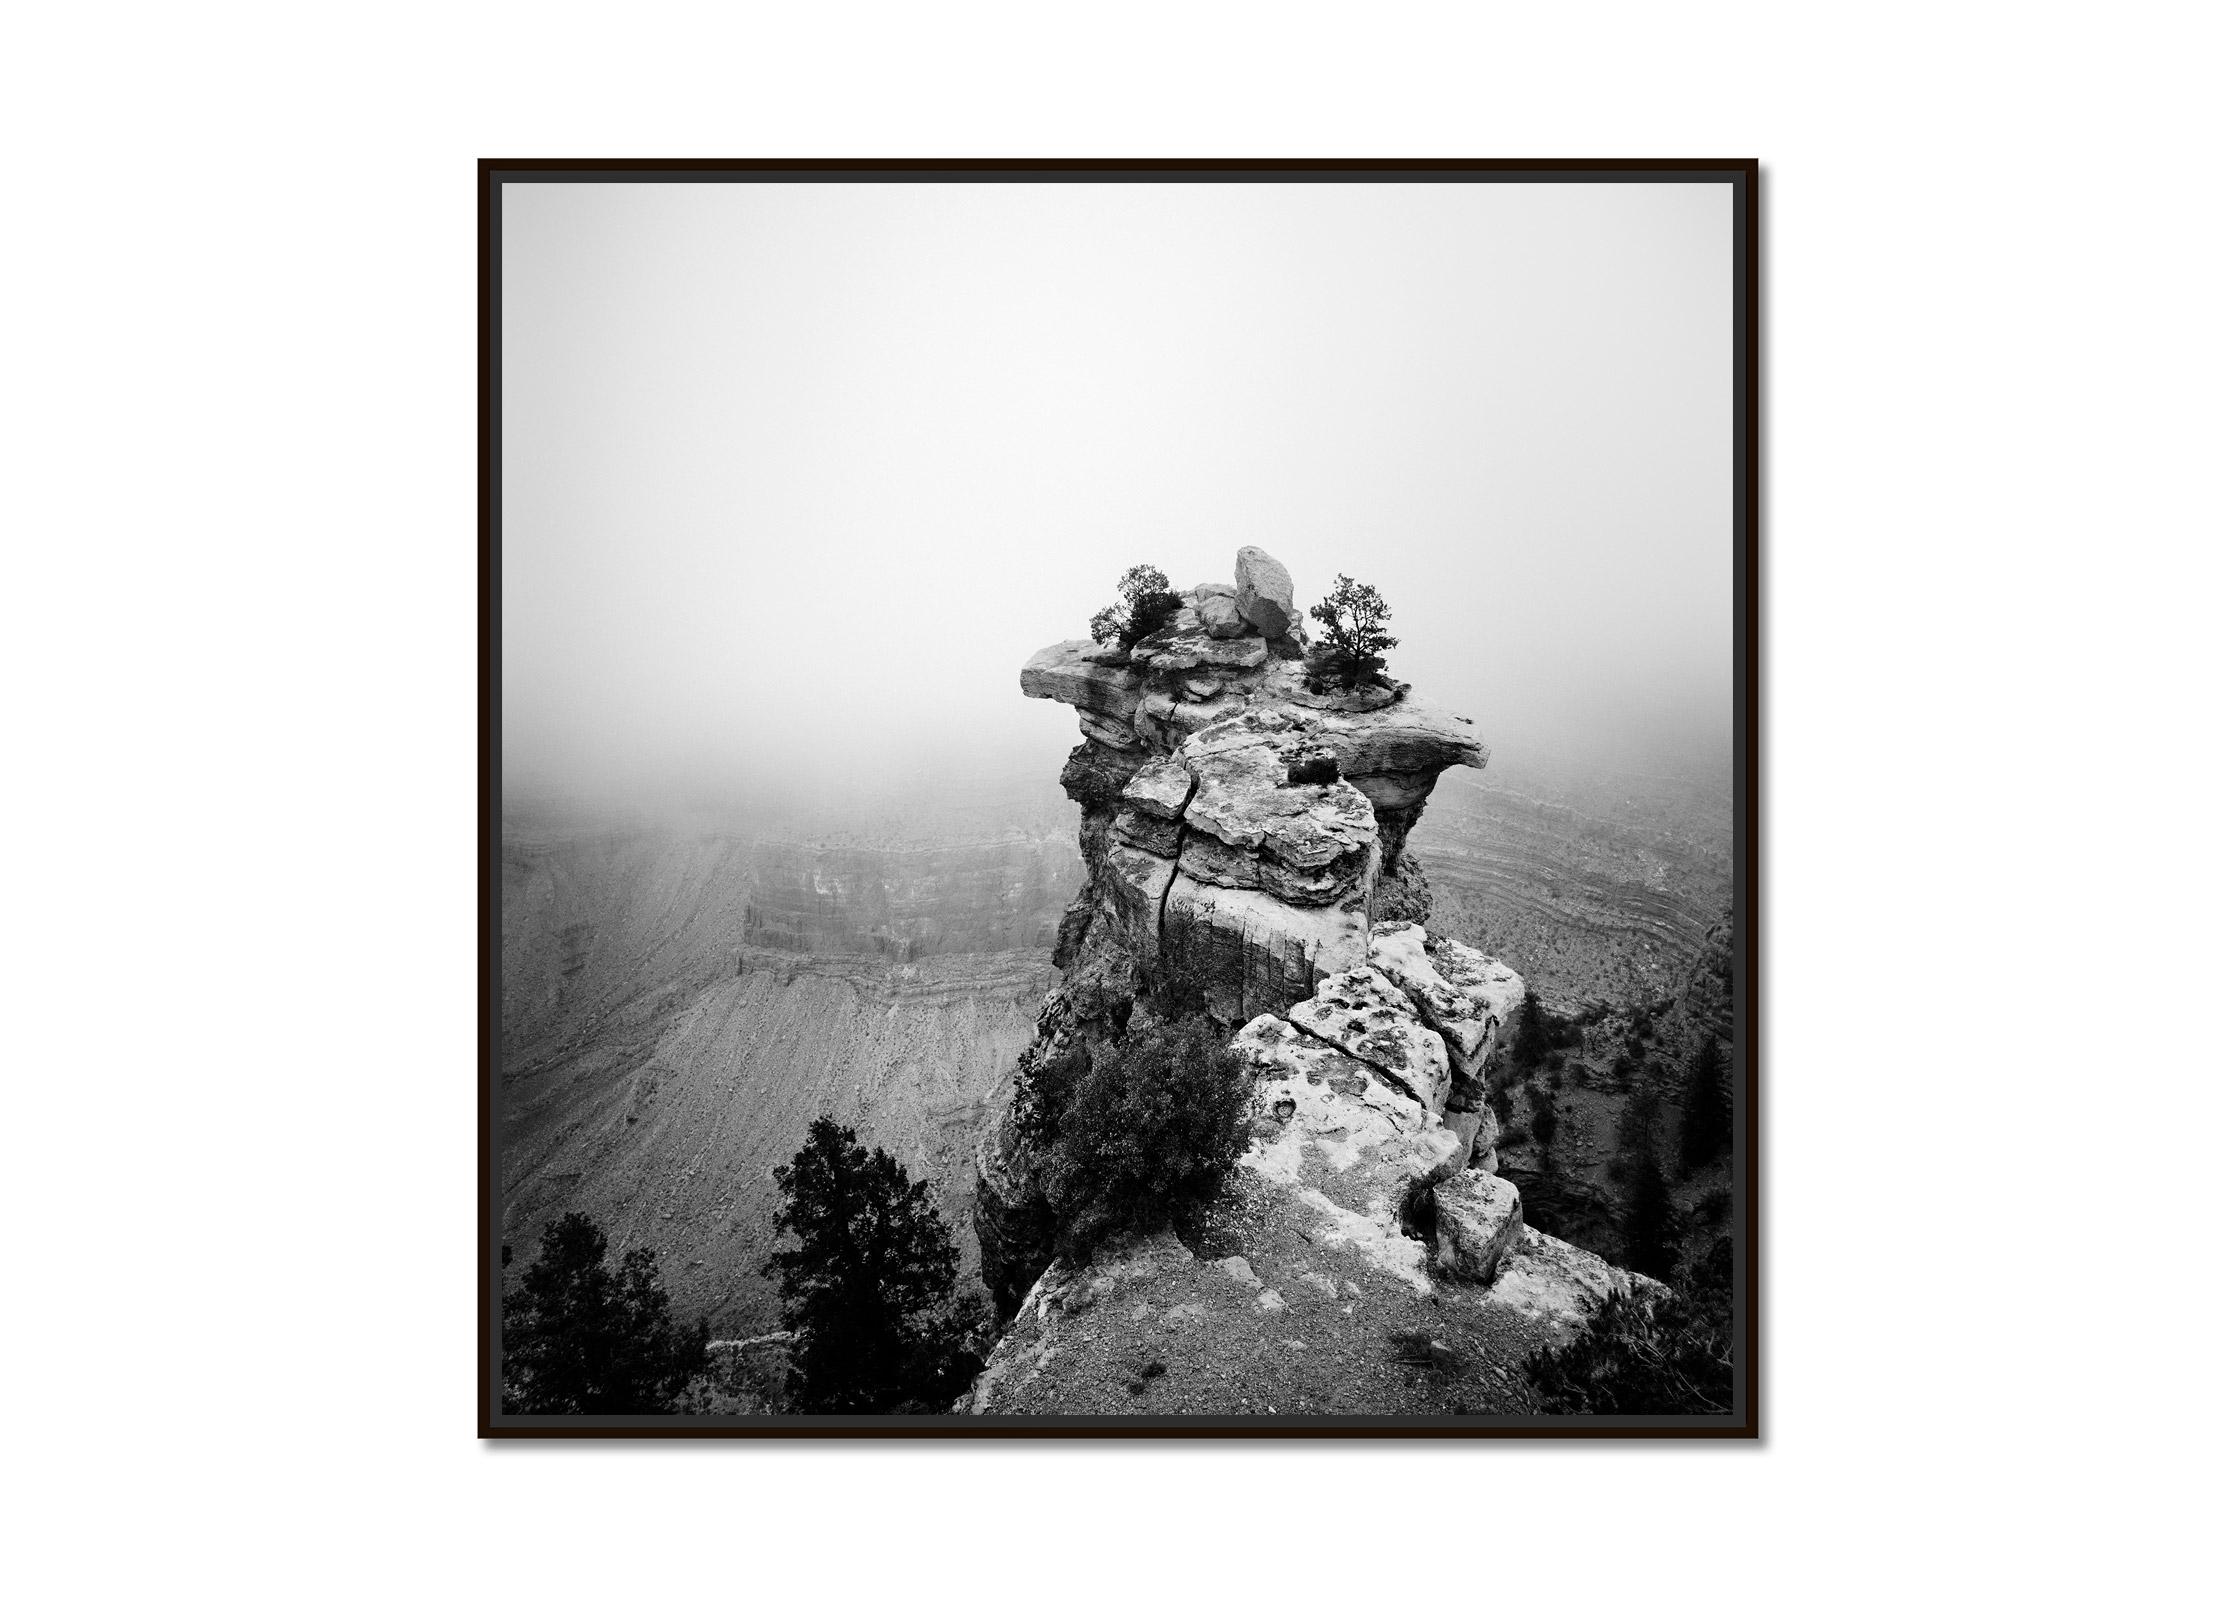 Grand Canyon, Mountains, Arizona, USA, black and white art landscape photography - Photograph by Gerald Berghammer